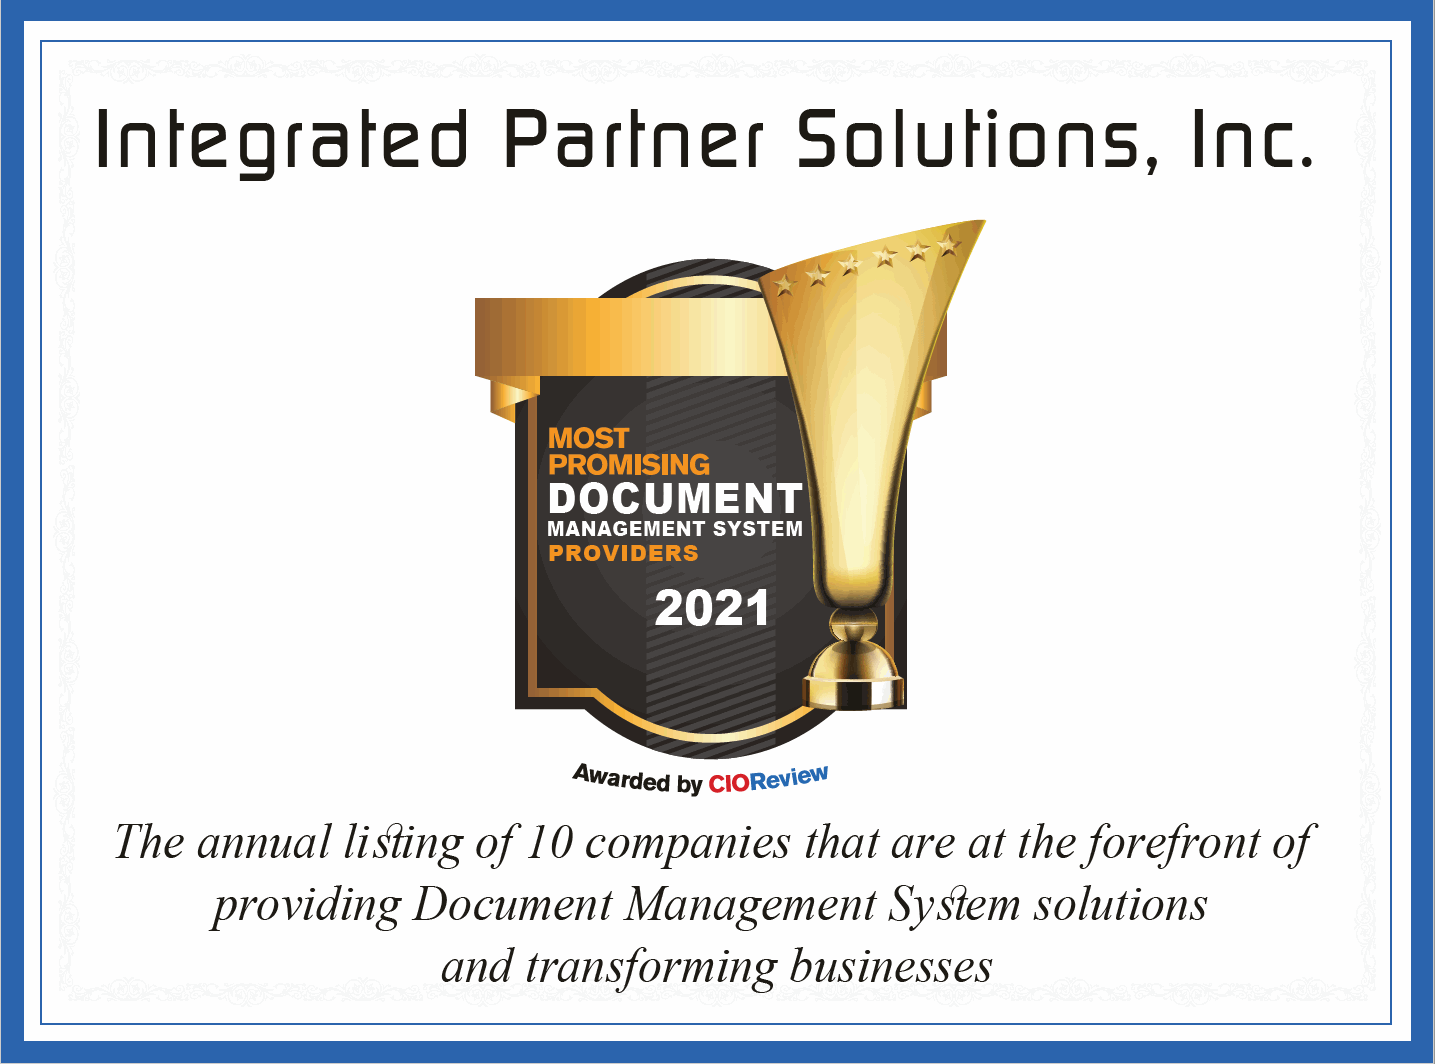 INTEGRATED PARTNER SOLUTIONS, INC.